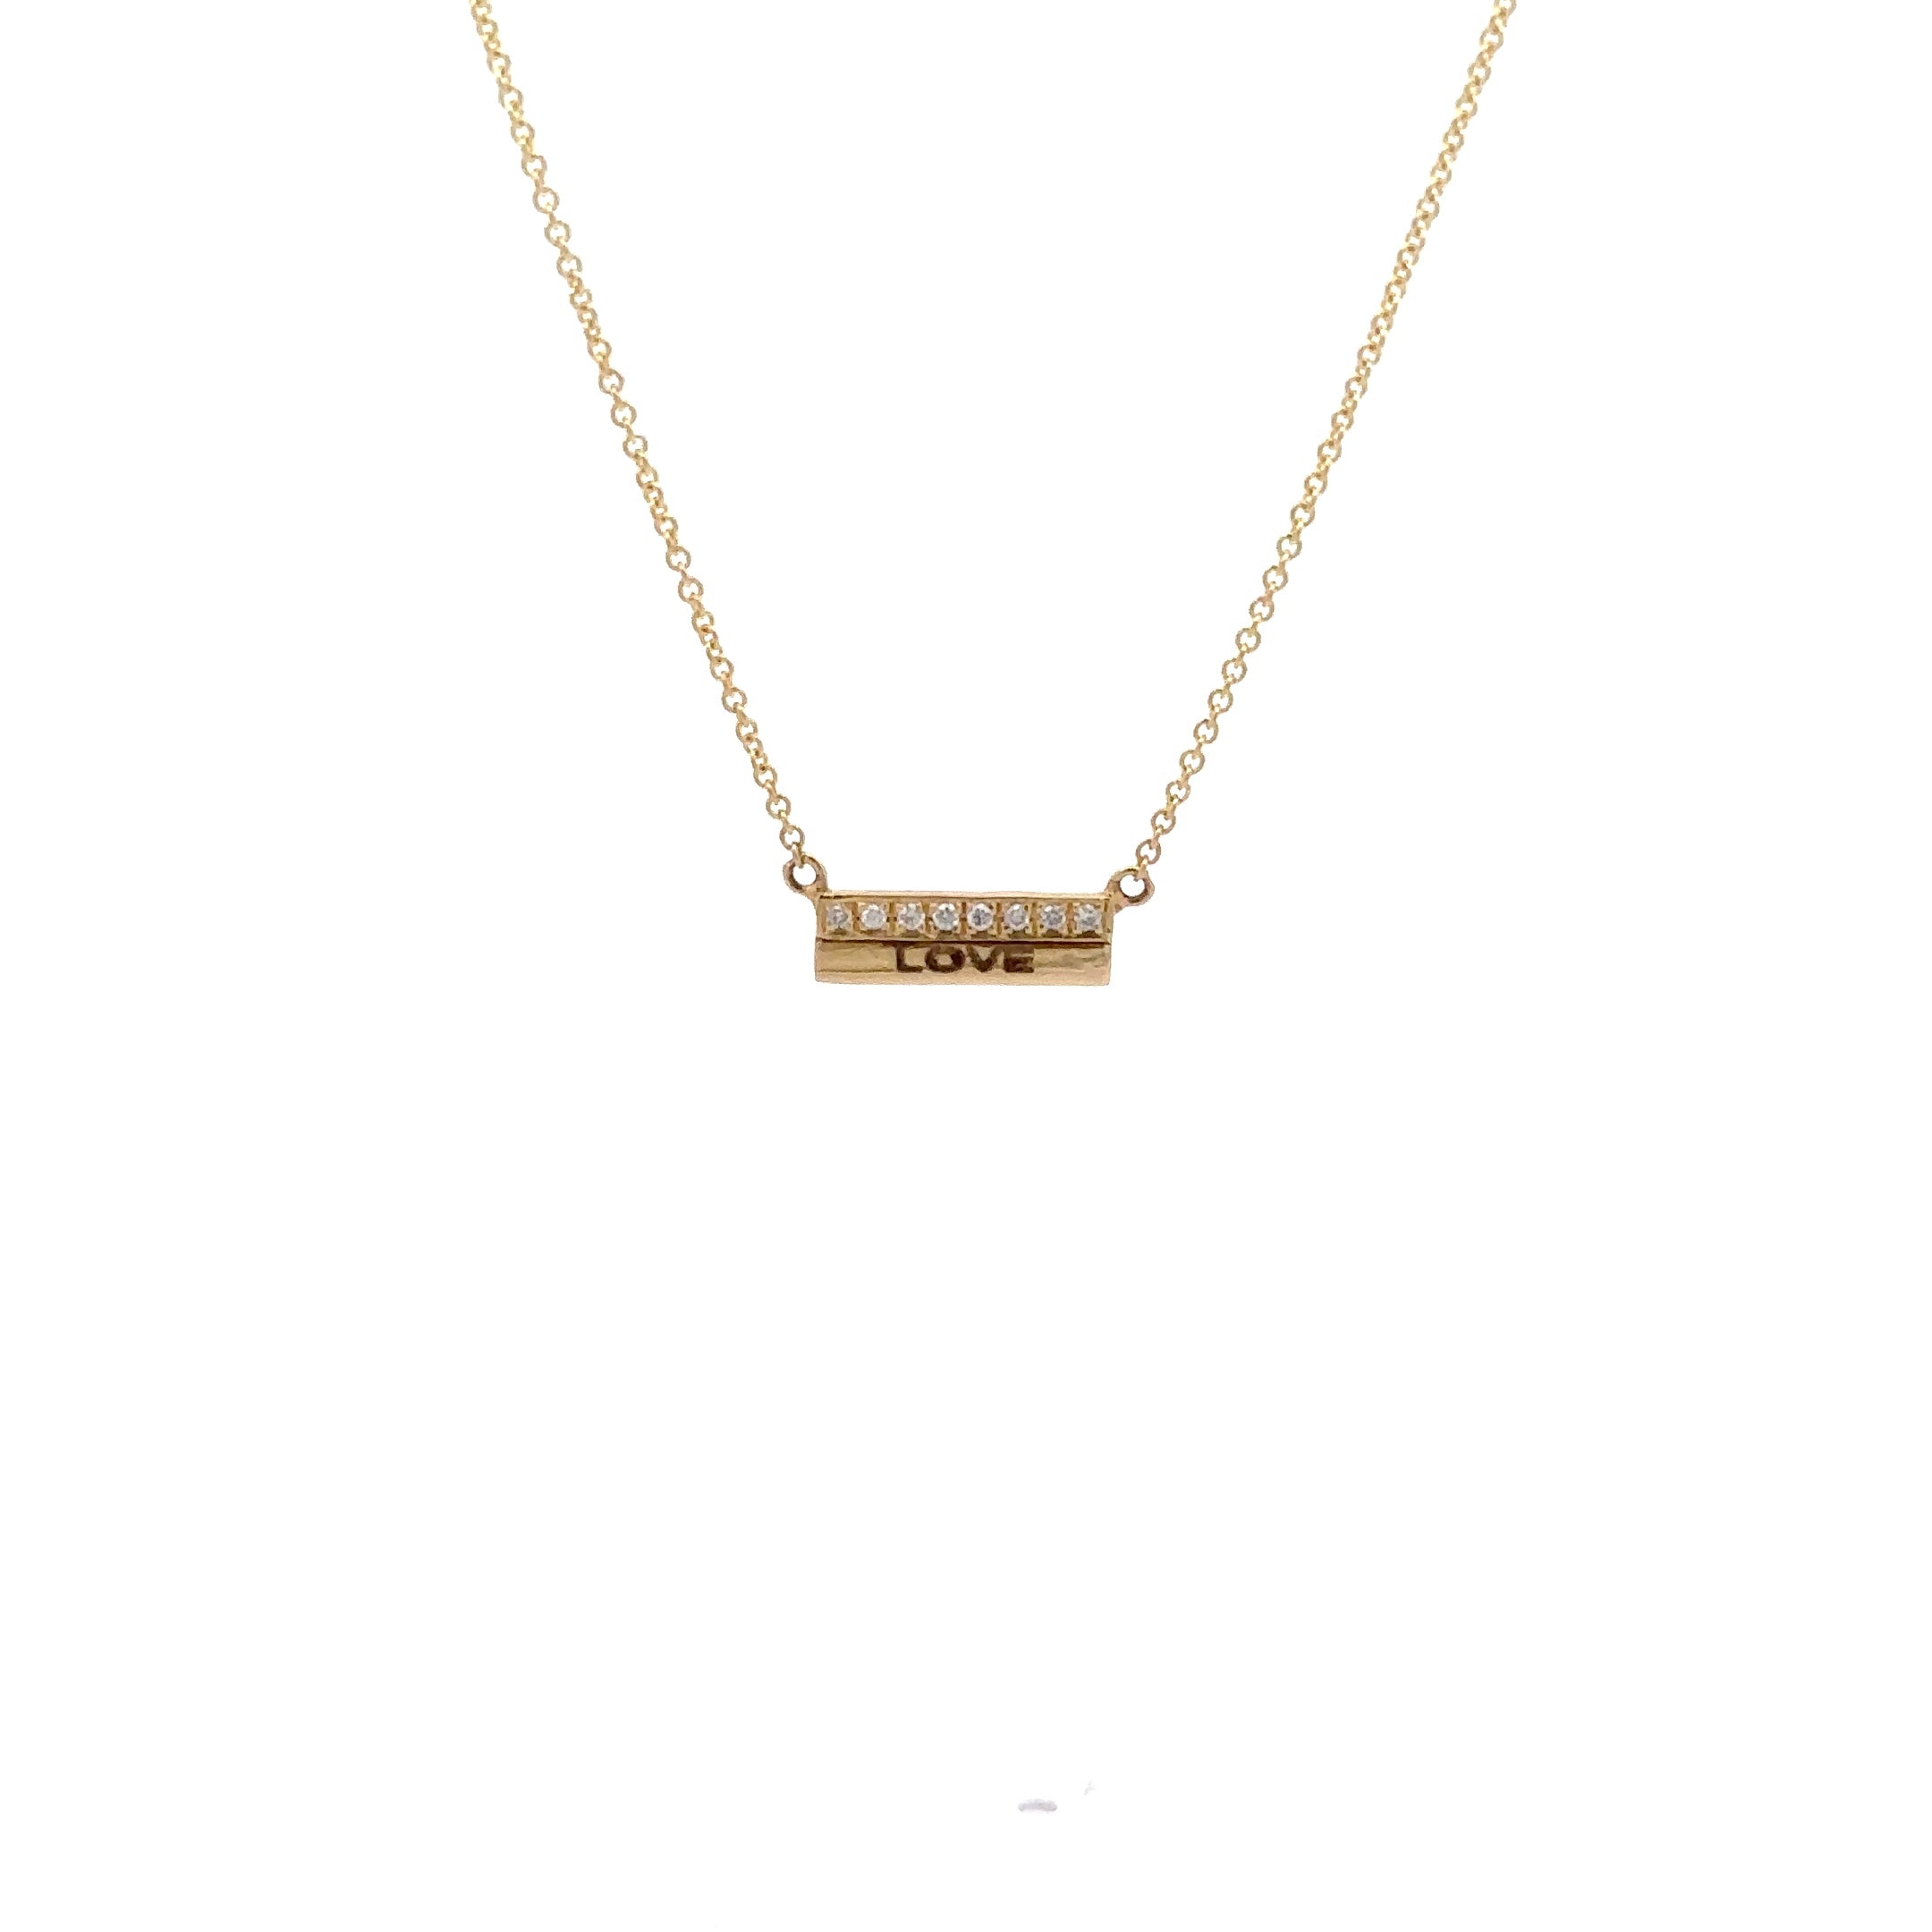 Buildon01, 14kt gold, 18in chain w loop at 16in, 2 bars one with pave one with laser or plain necklace